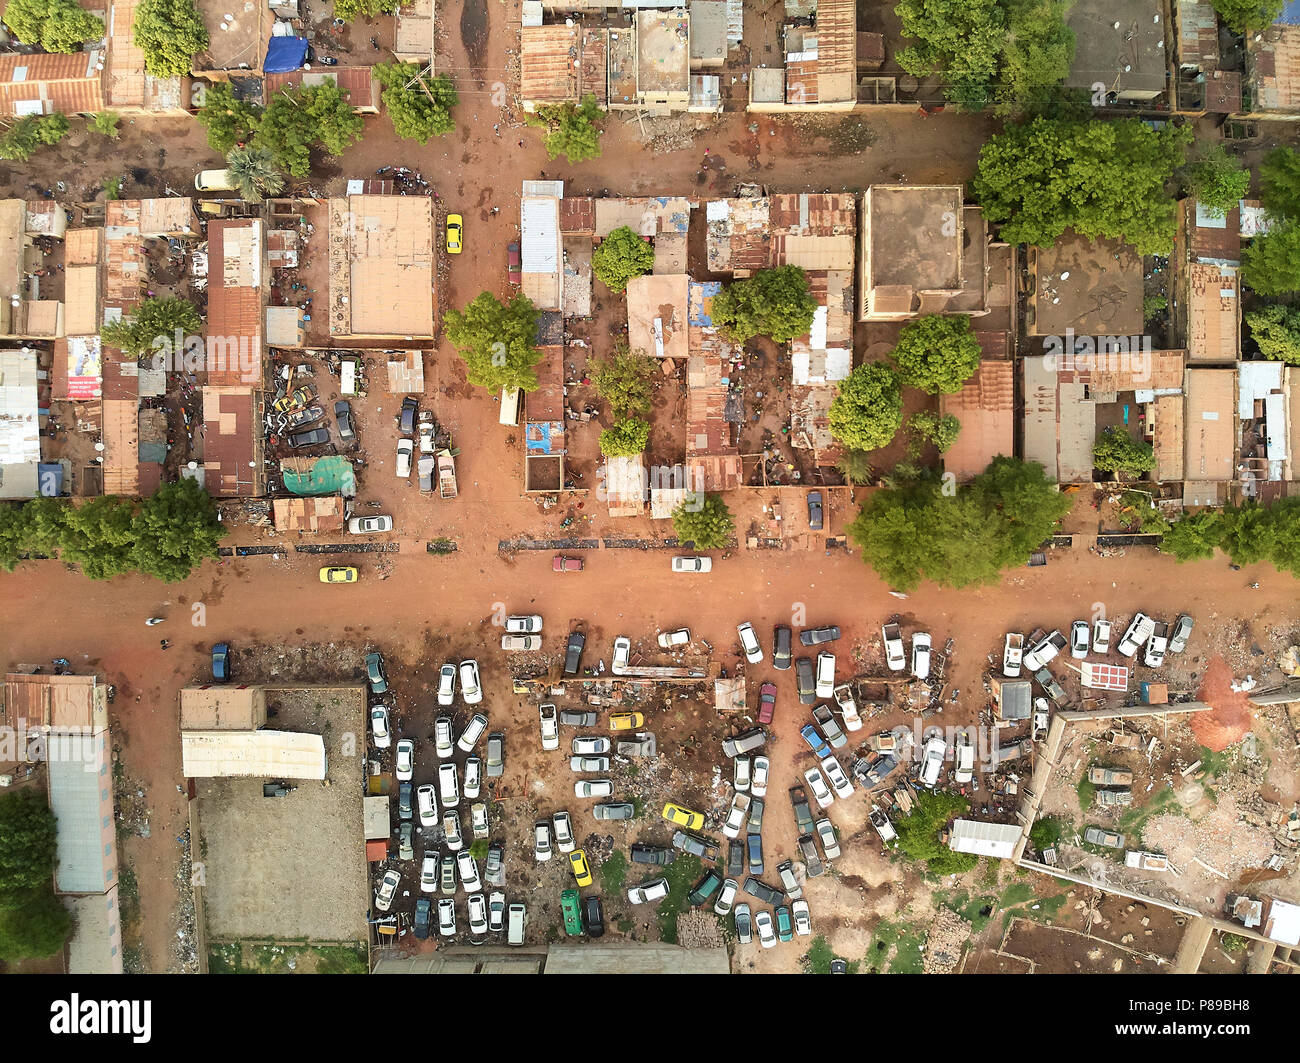 Bamako is the capital and largest city of Mali, with a population of 1.8 million. In 2006, it was estimated to be the fastest-growing city in Africa a Stock Photo